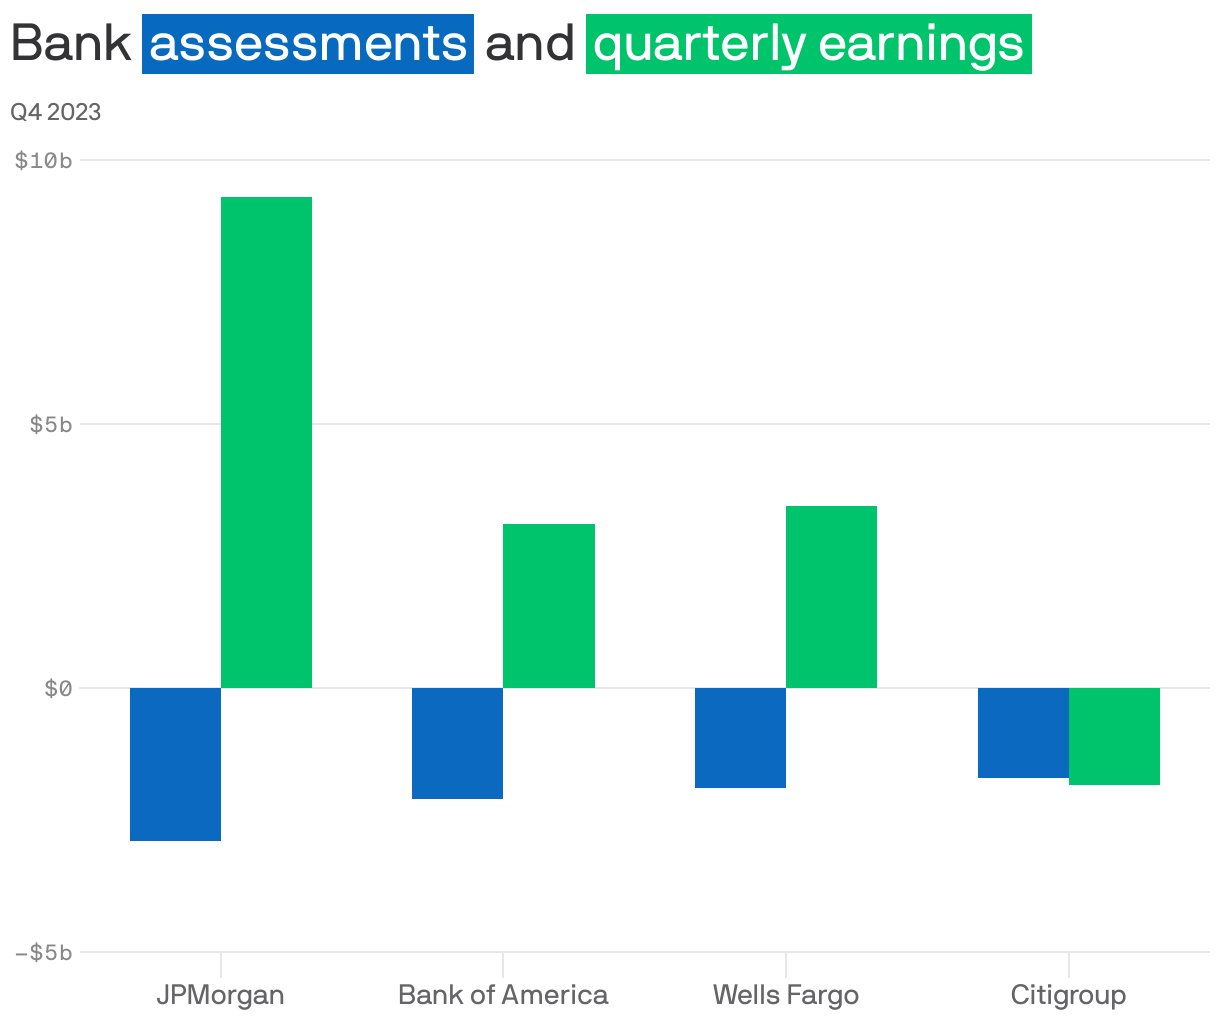 Bank <span style="background:#086ABF; padding:2px 3px;color:white;"> assessments</span> and <span style="background:#00C46B; padding:2px 3px;color:white;"> quarterly earnings</span> 